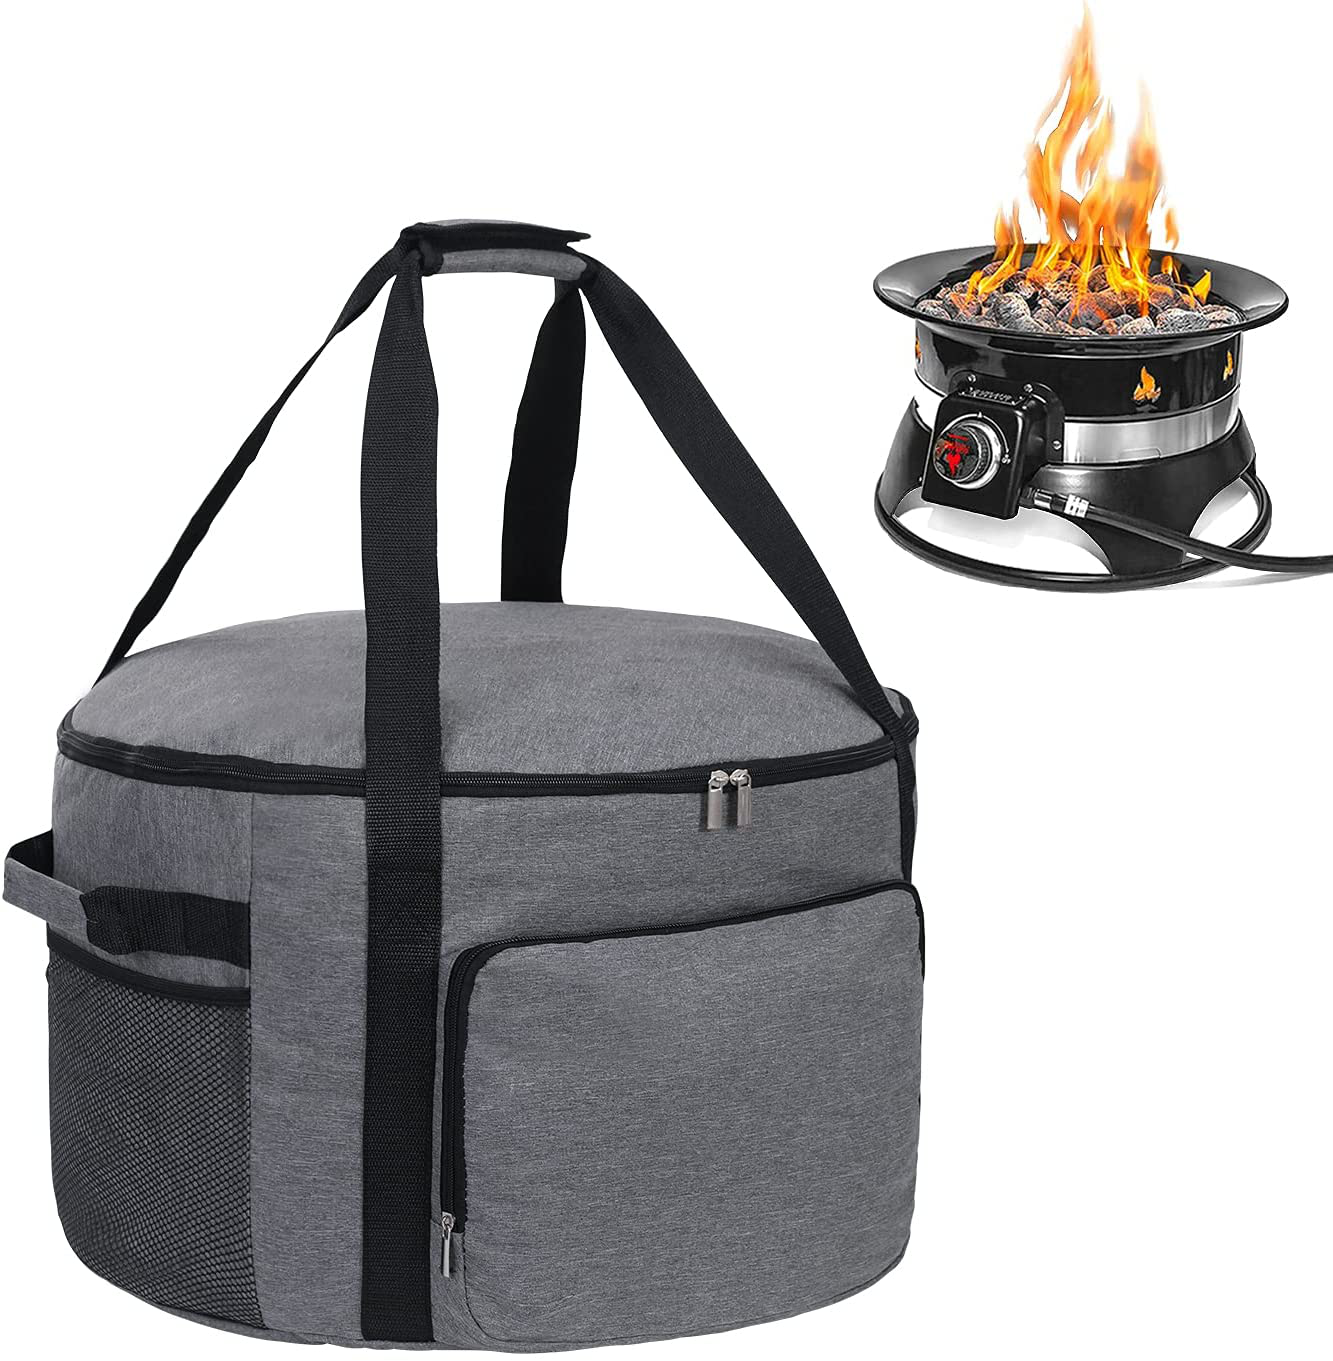 Outdoor Fire Pit Bag for Outland Firebowl Model 893 870 823, OSPUORT fire Pit Carrying Bag Propane Gas Fire Pit Carry case 19 Inch Diameter Bag Only (Gray)